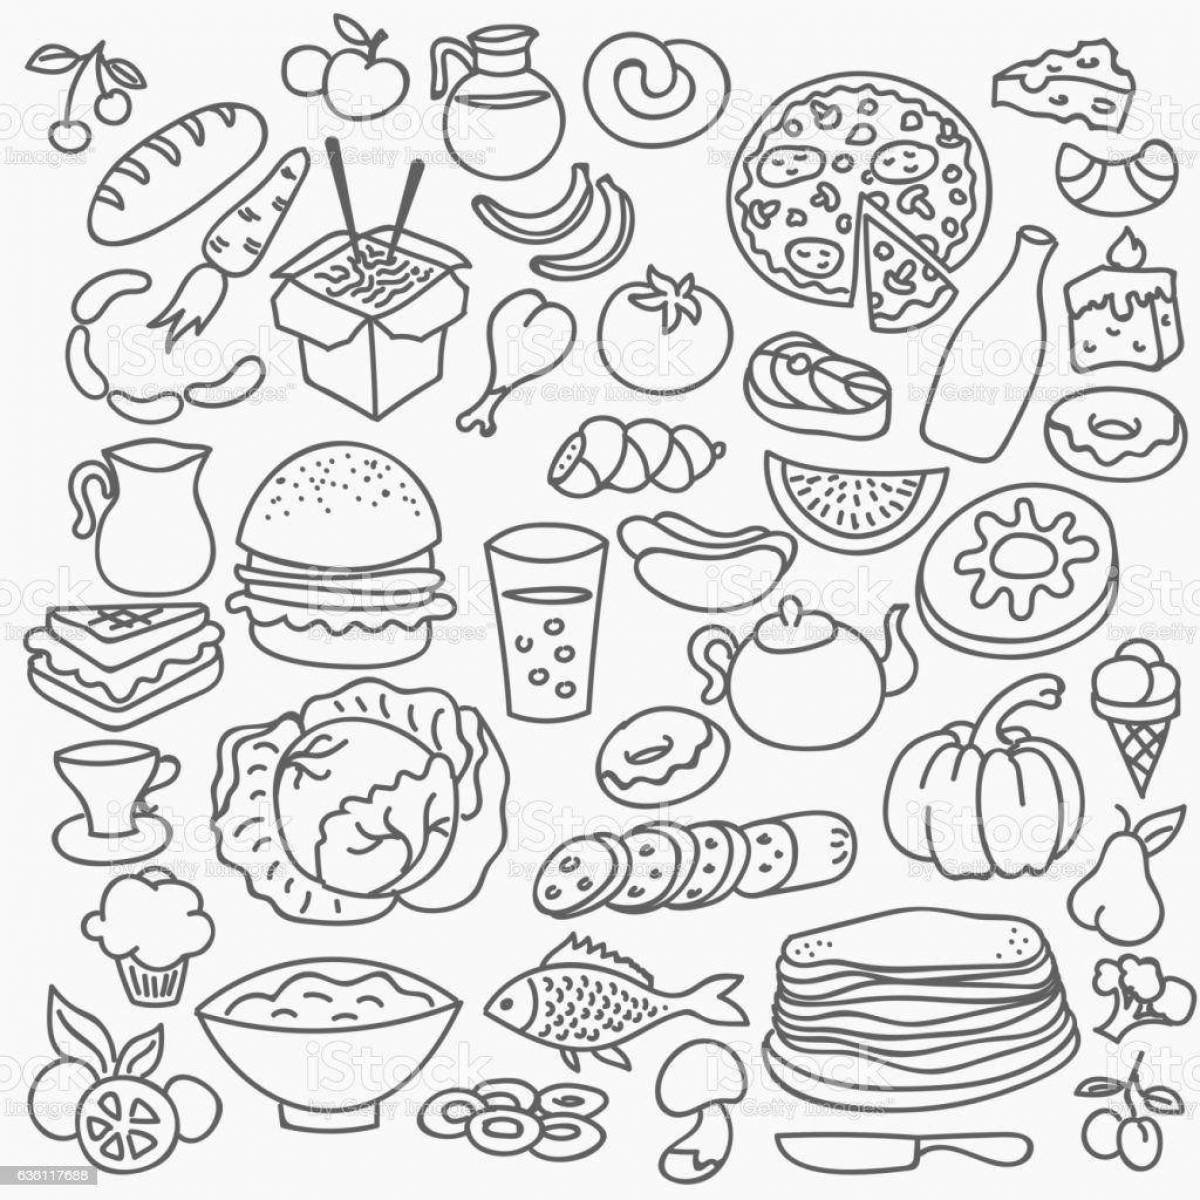 Food sticker coloring page